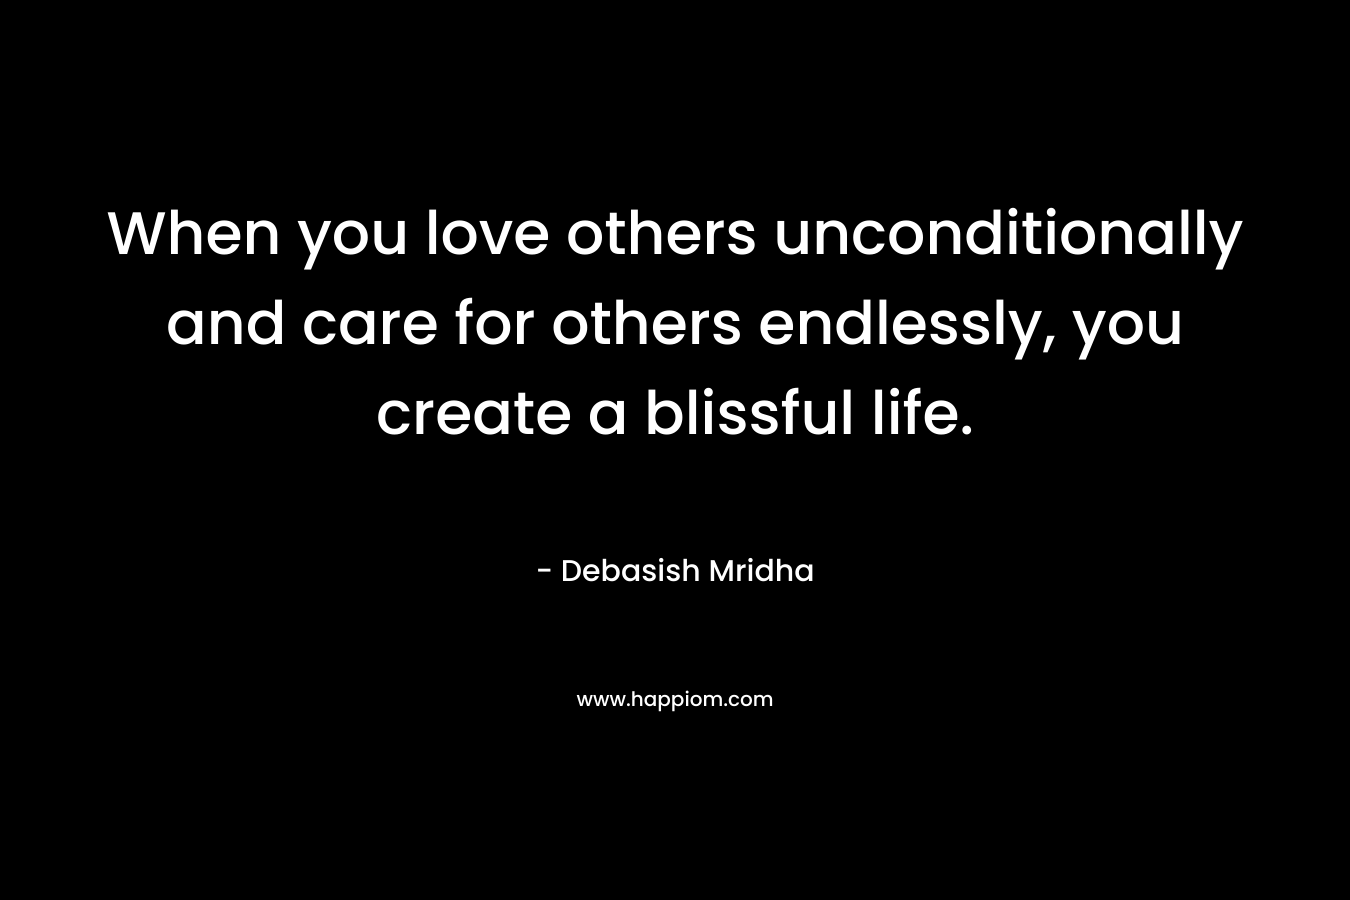 When you love others unconditionally and care for others endlessly, you create a blissful life.